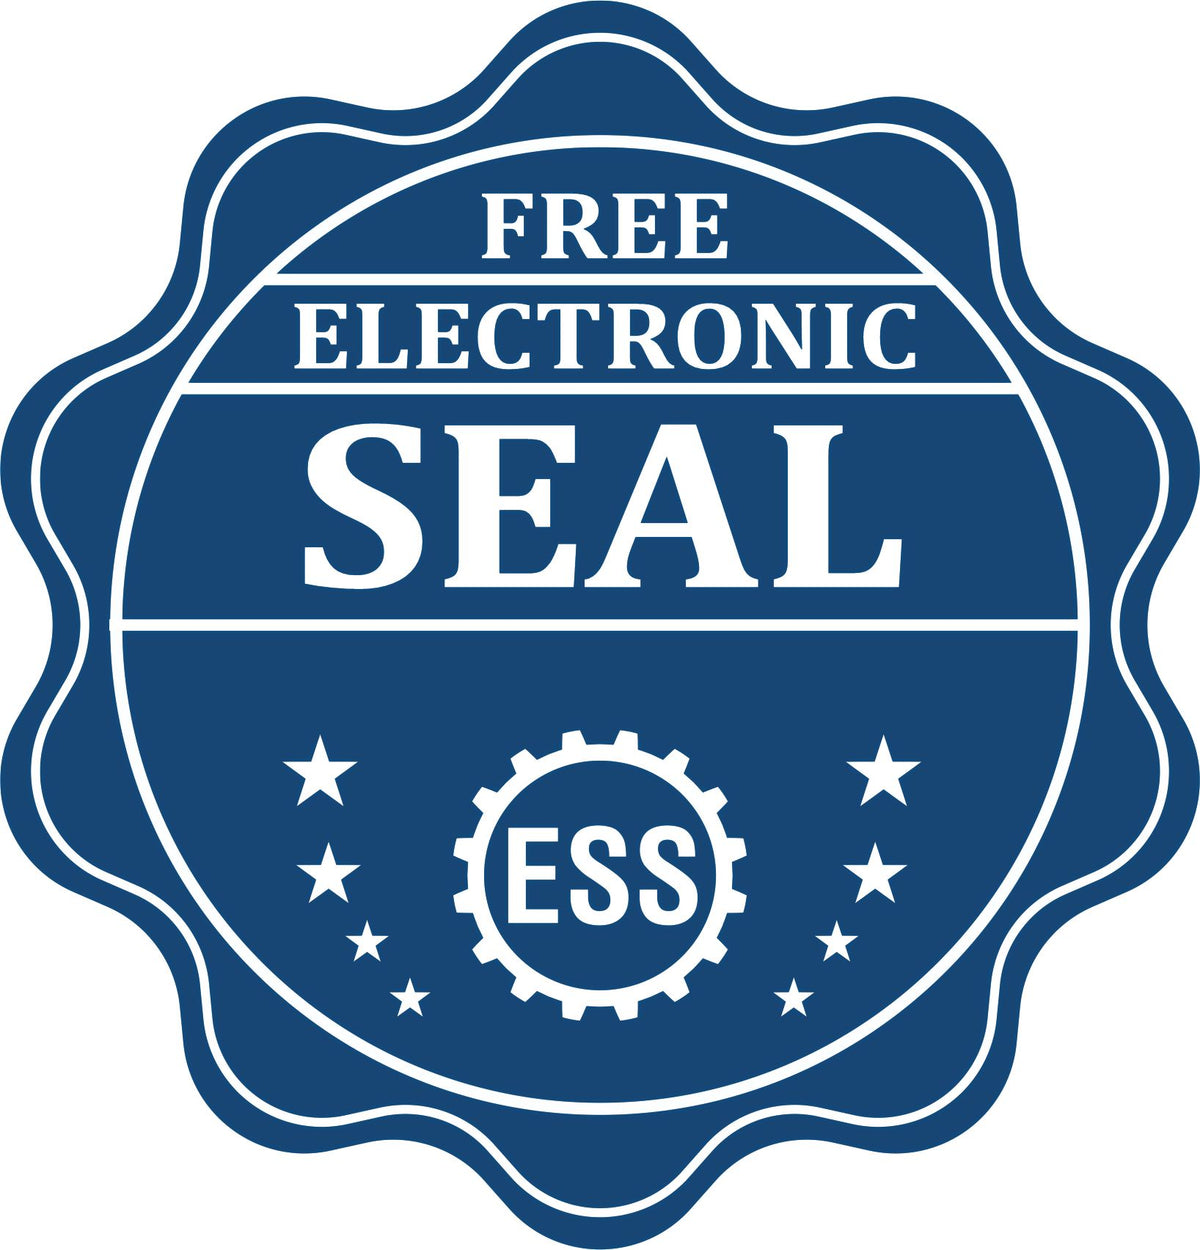 A badge showing a free electronic seal for the Slim Pre-Inked Arizona Land Surveyor Seal Stamp with stars and the ESS gear on the emblem.